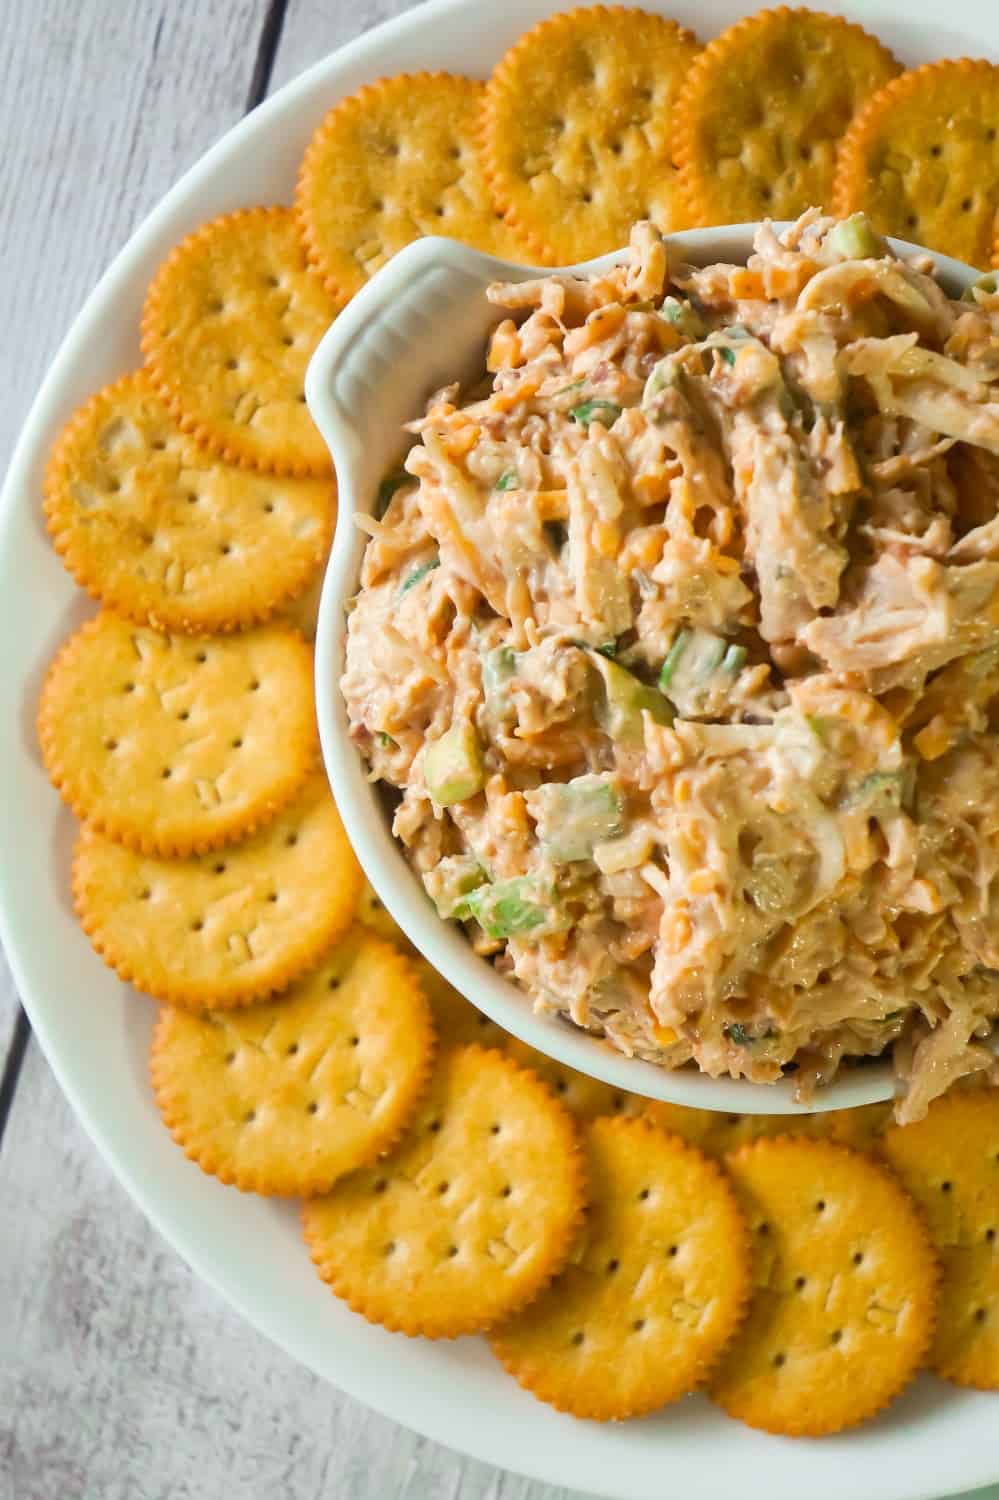 BBQ Chicken Dip is a delicious cold party dip recipe perfect for serving with Ritz Crackers. This flavourful dip is loaded with shredded chicken, crumbled bacon, cheese and BBQ sauce.